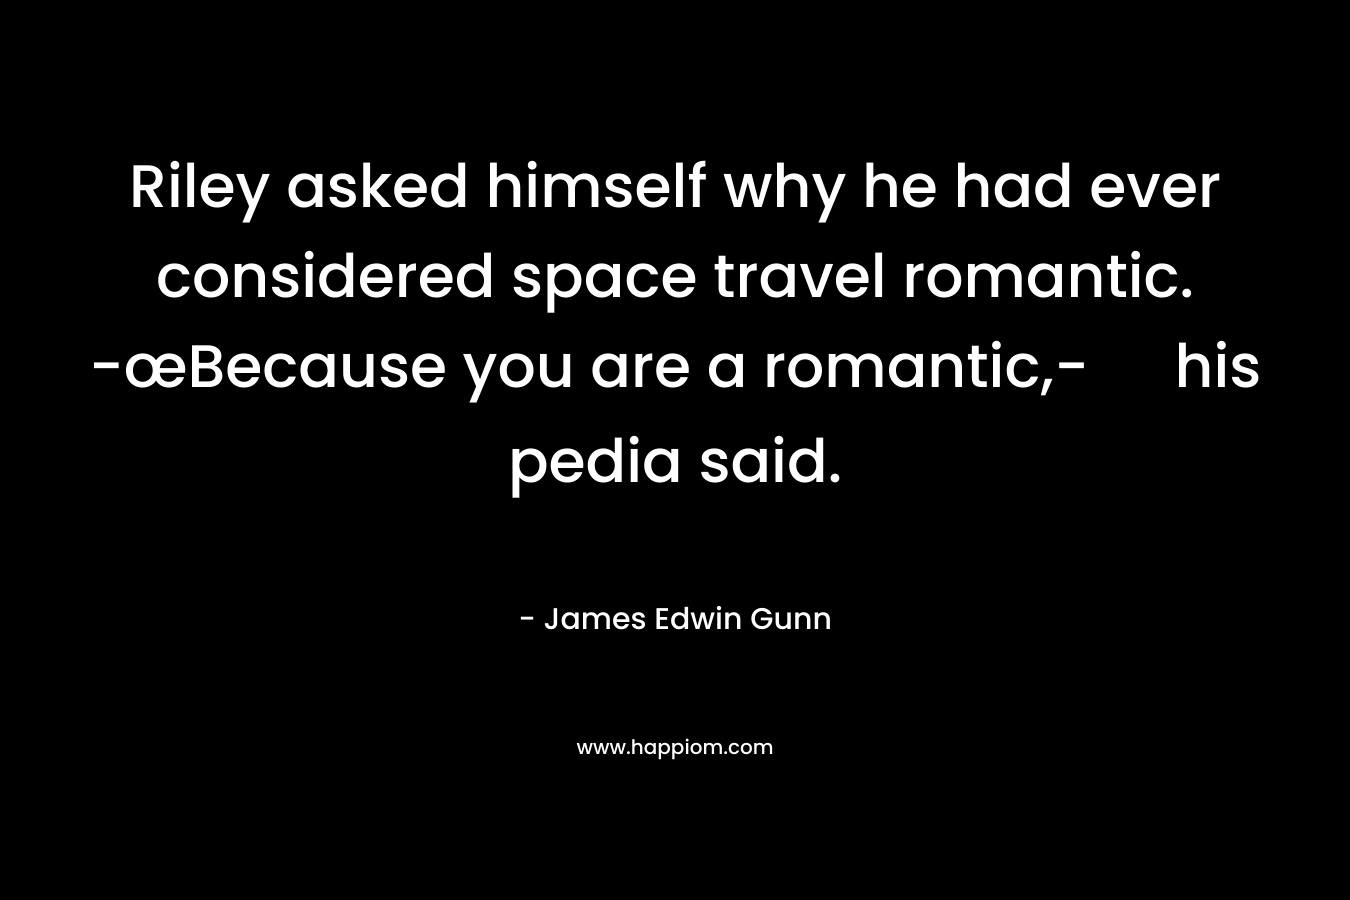 Riley asked himself why he had ever considered space travel romantic. -œBecause you are a romantic,- his pedia said.